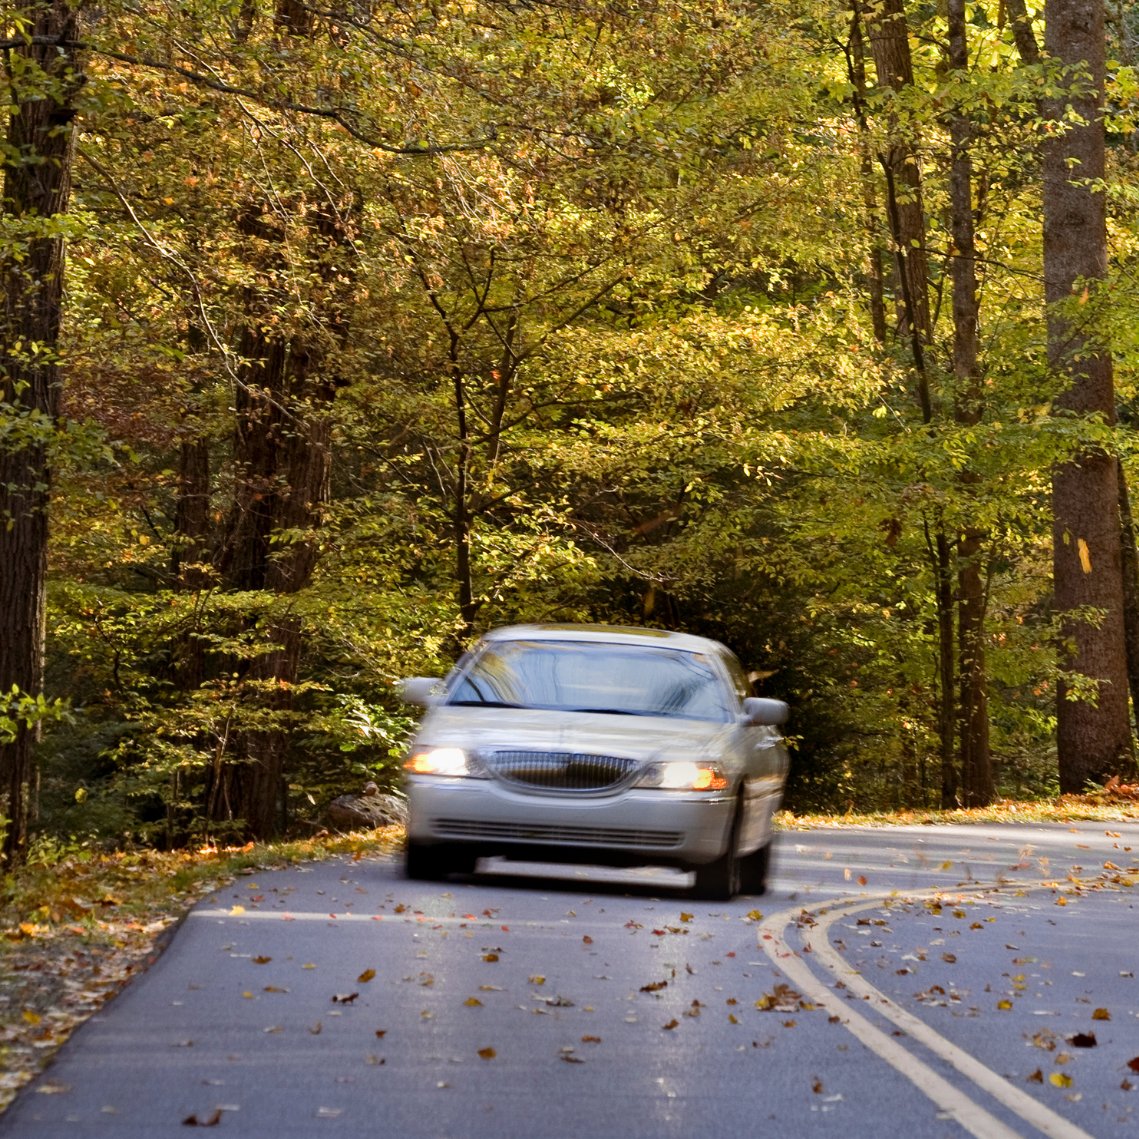 Slippery roads and poor visibility, Autumn can be a hazardous time for drivers. If you find yourself driving during an early autumn sunset remember to ensure your windscreen is clean and free from smears enhanced by low sun to avoid dazzle.   

#AutumnDriving